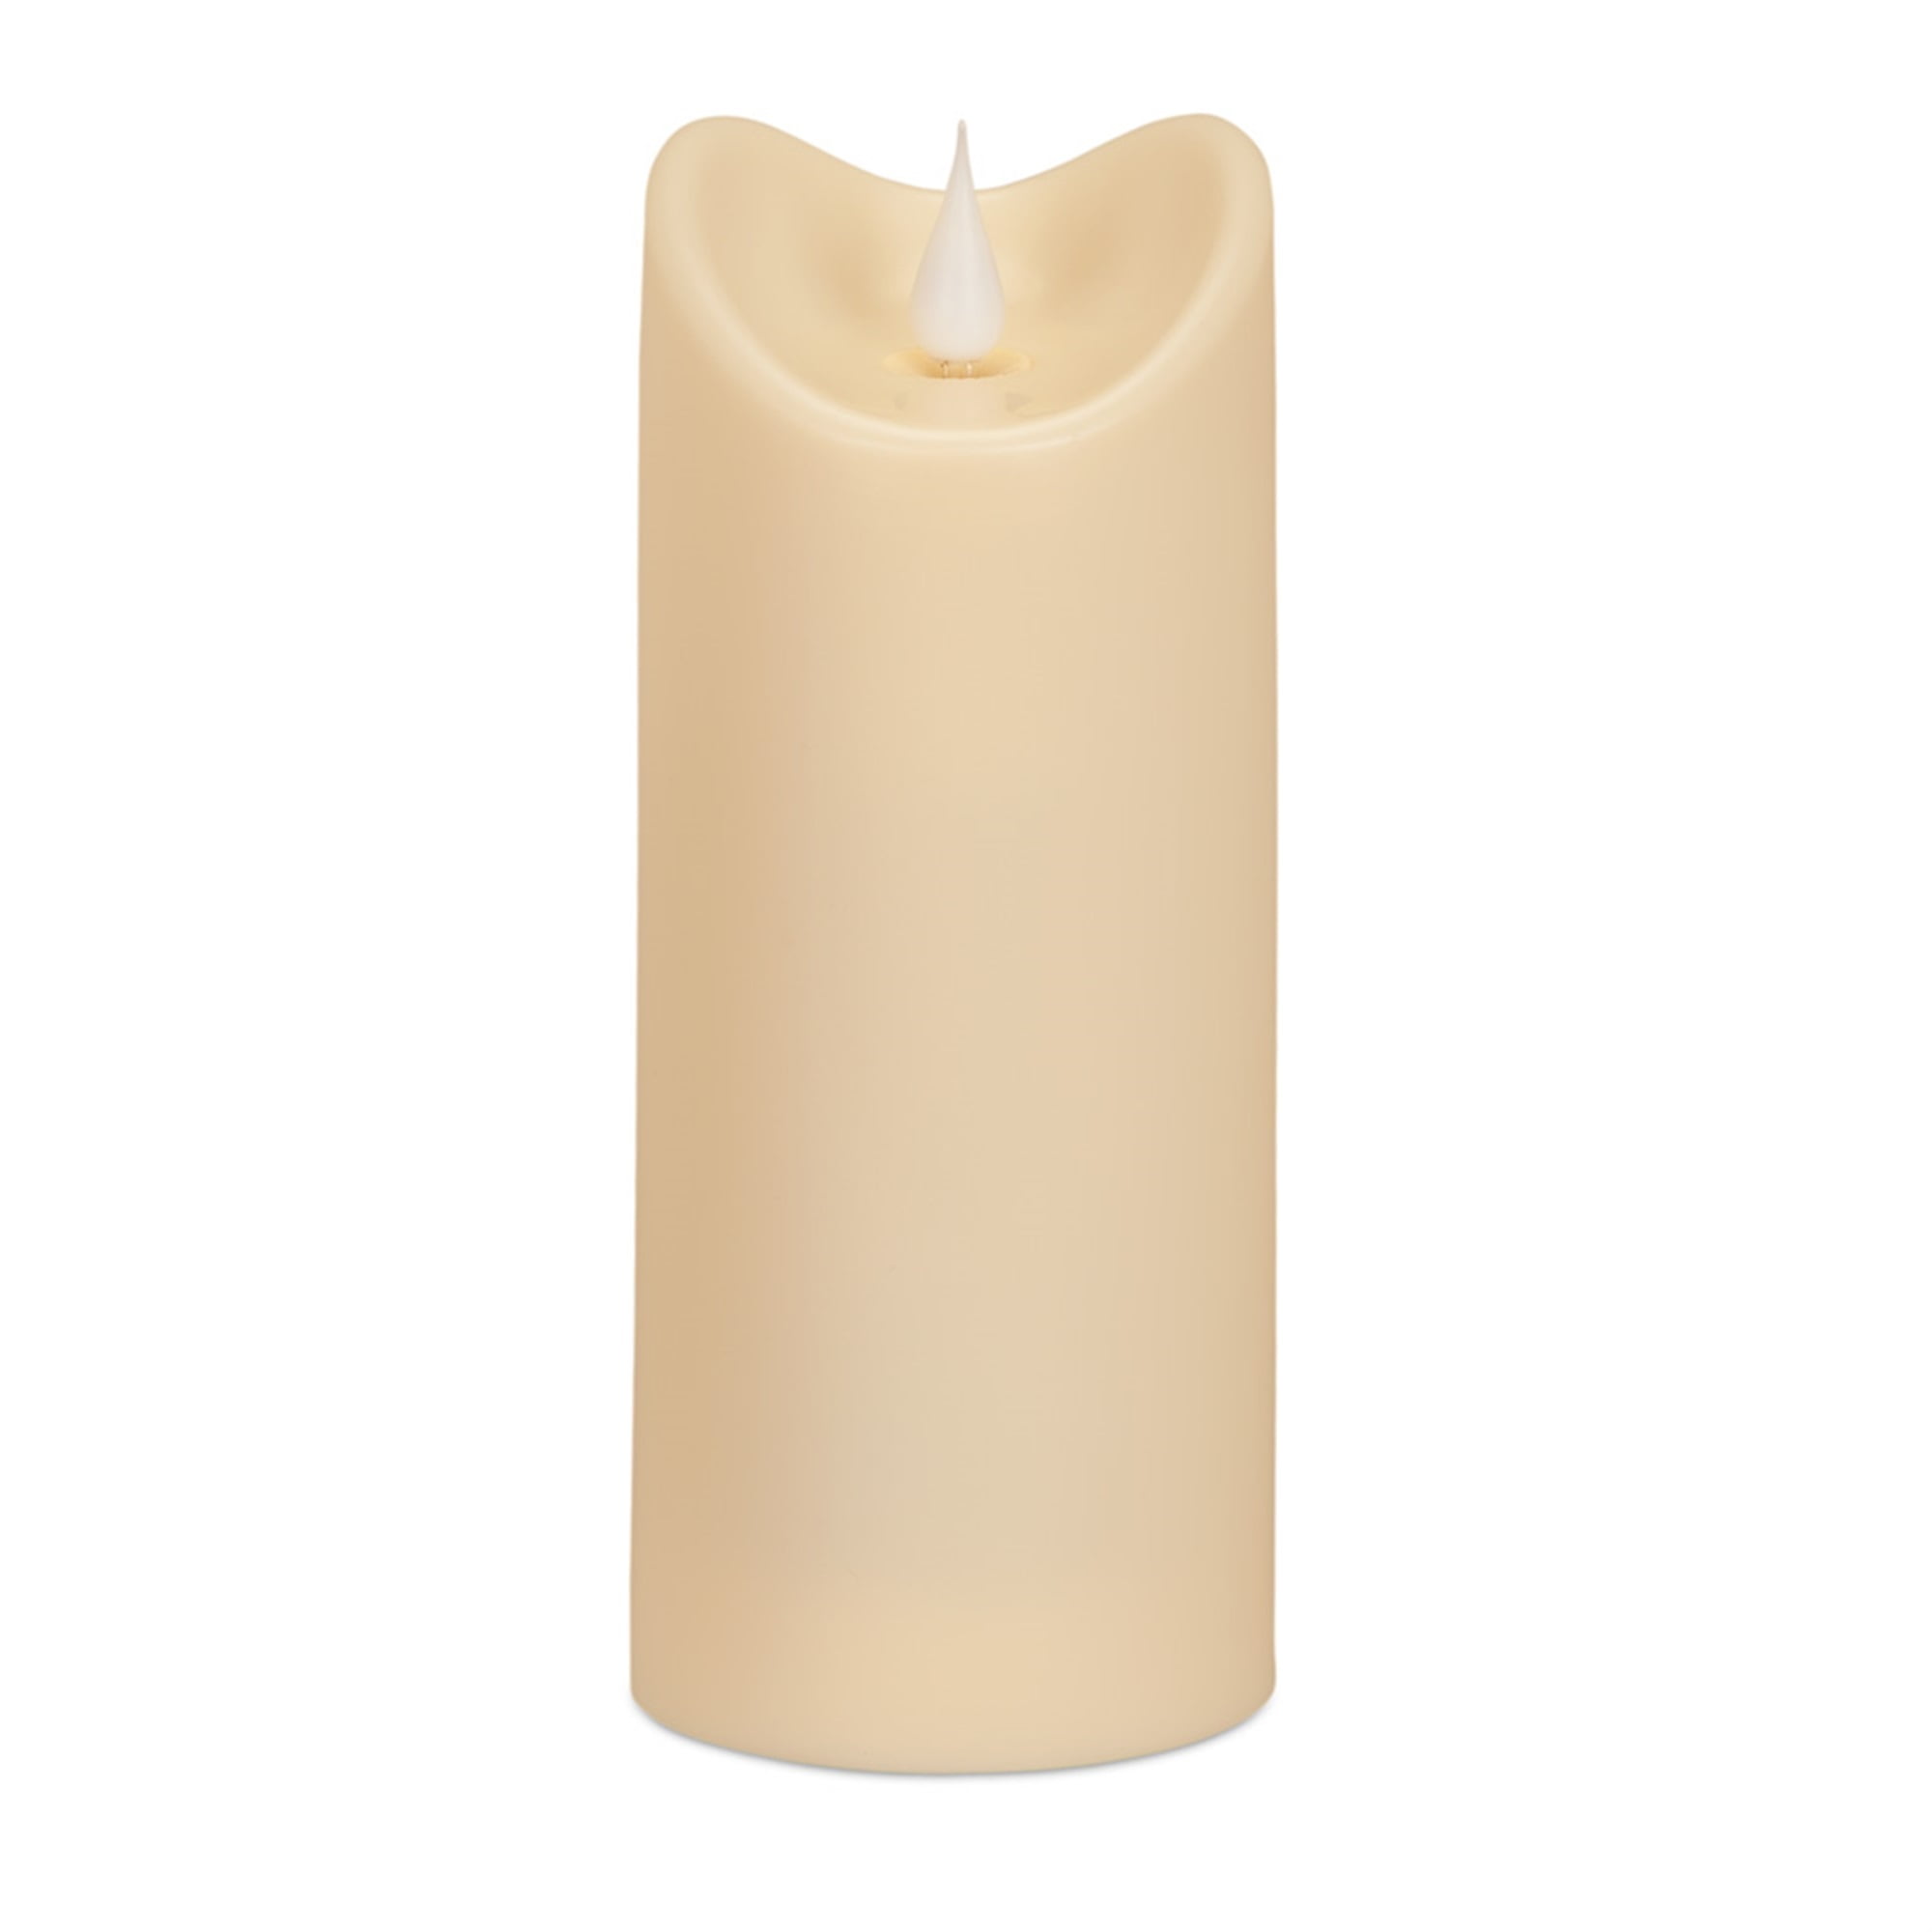 Simplux Plastic Outdoor Candle w/Moving Flame (Set of 2) 2.75"D x 7"H